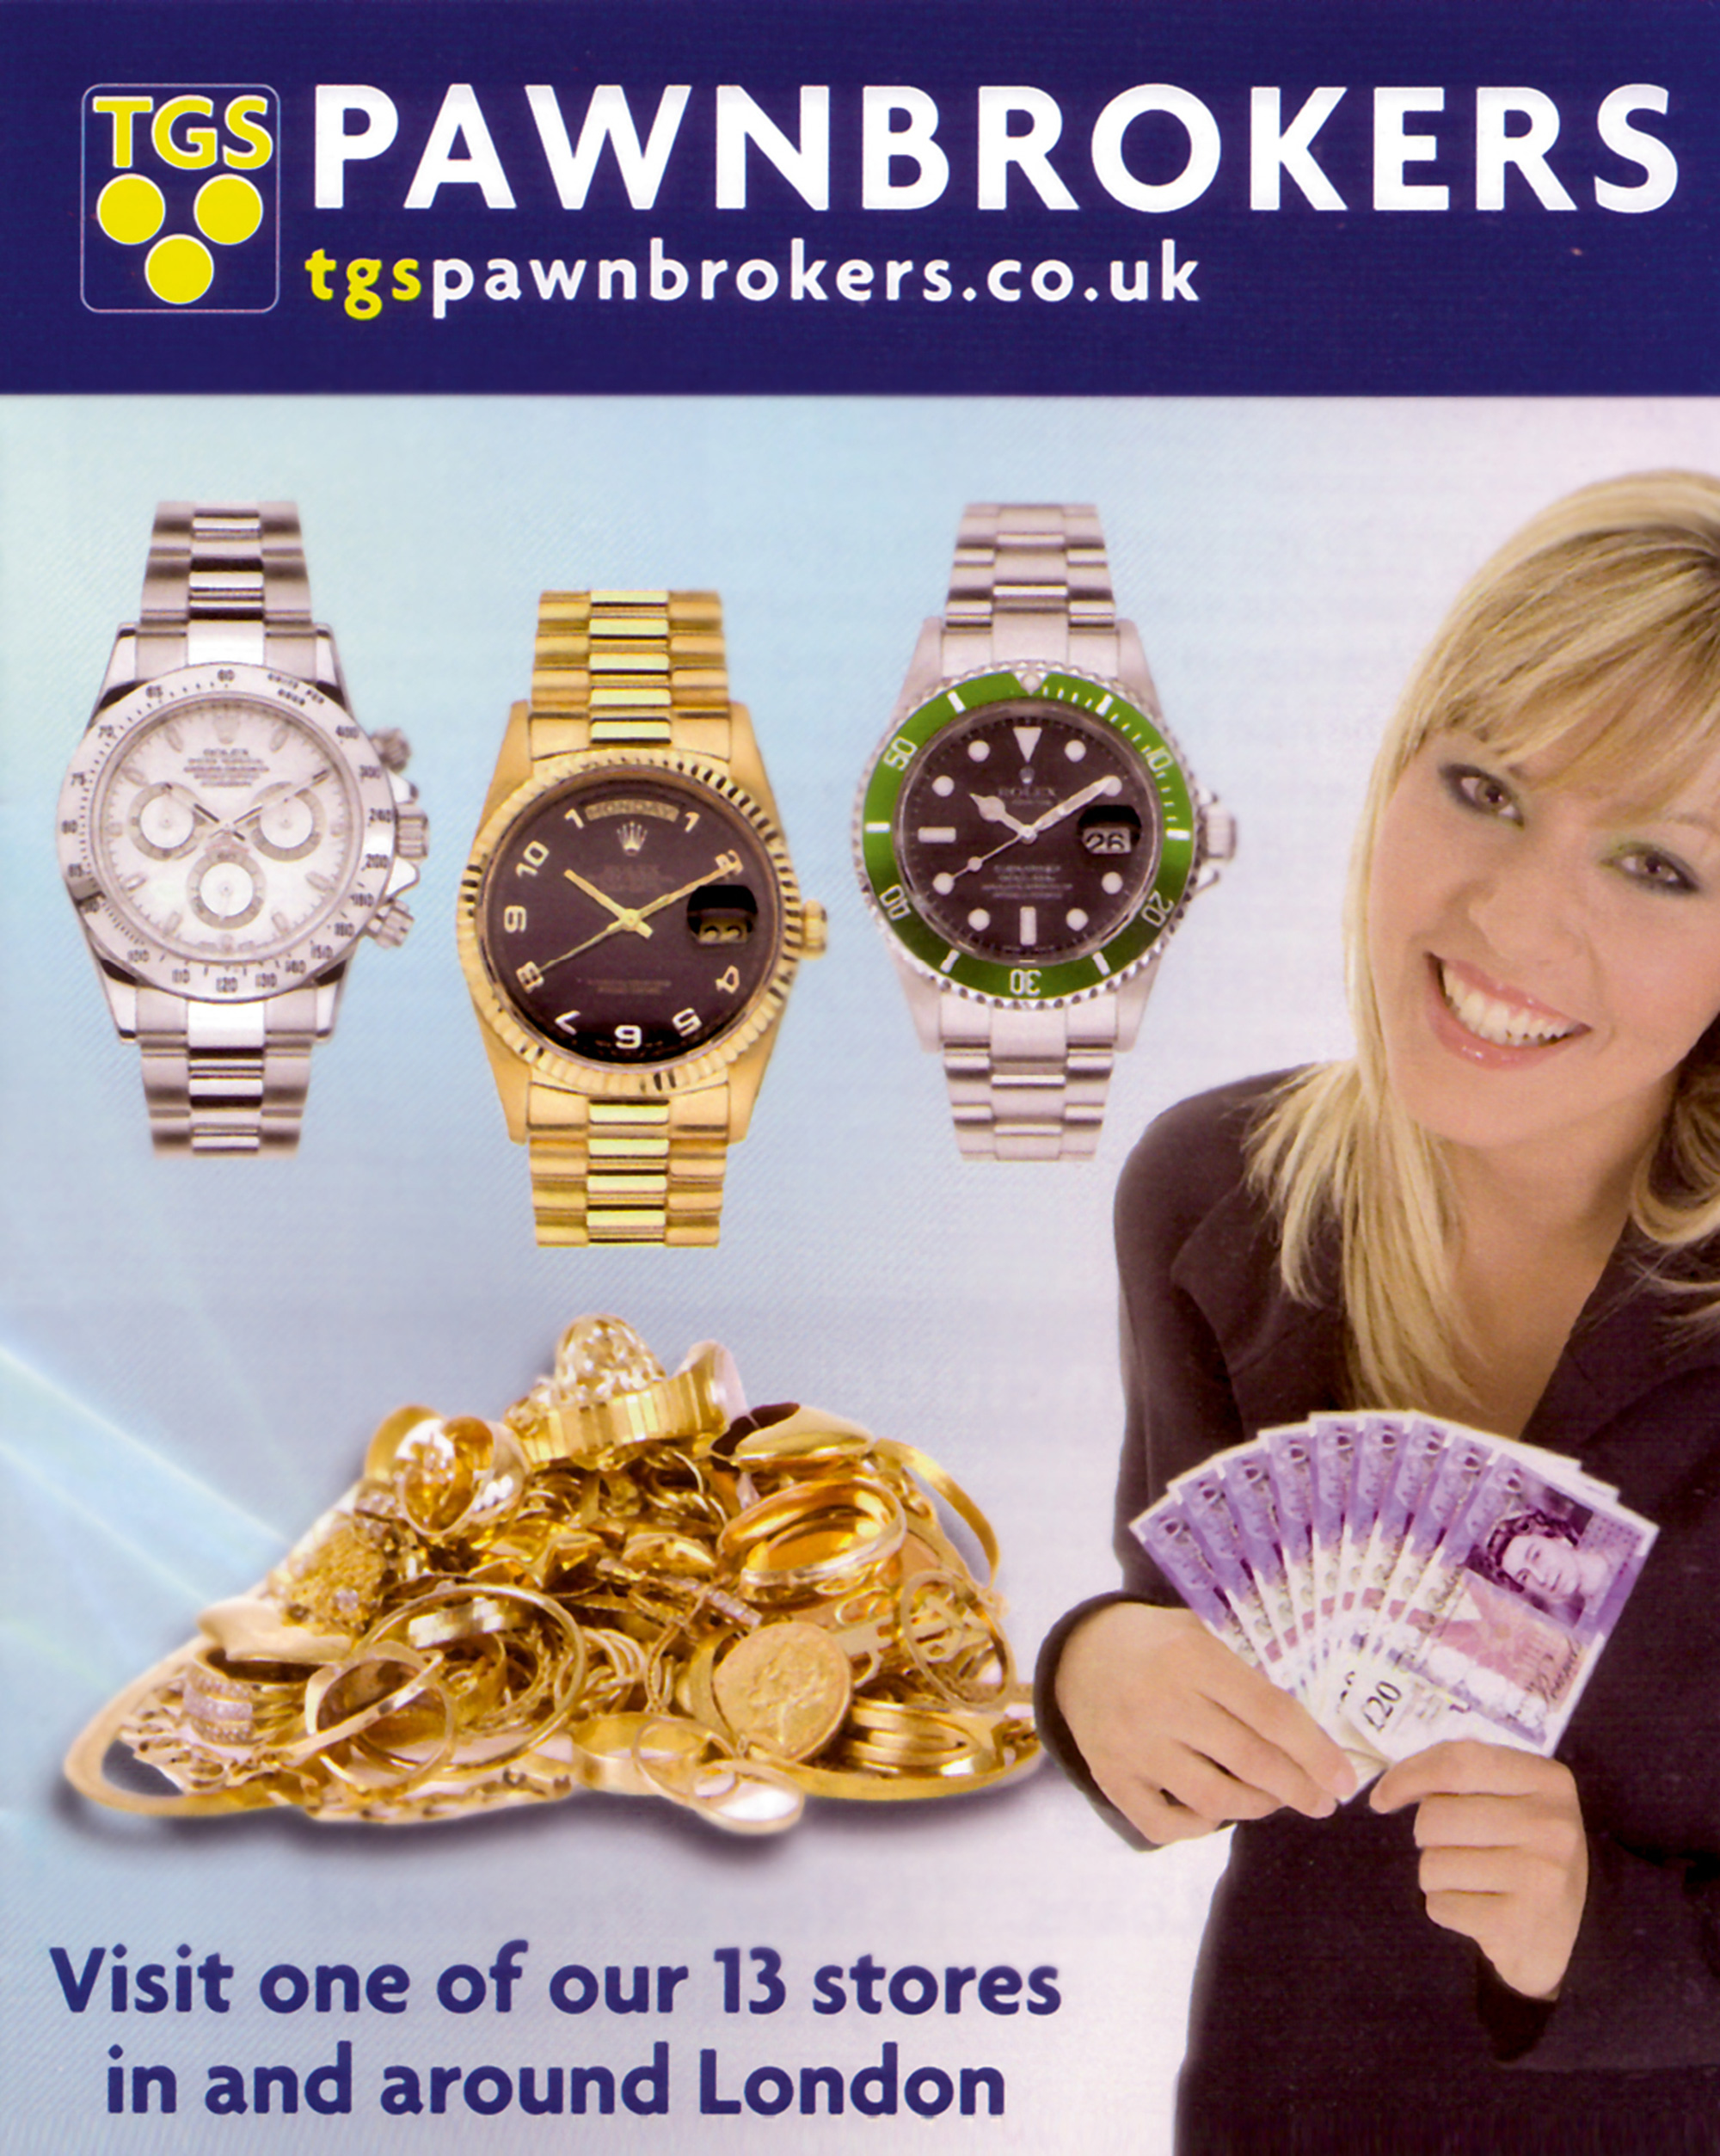 An advertisement for a pawnbroker who melts watches down into gold. 